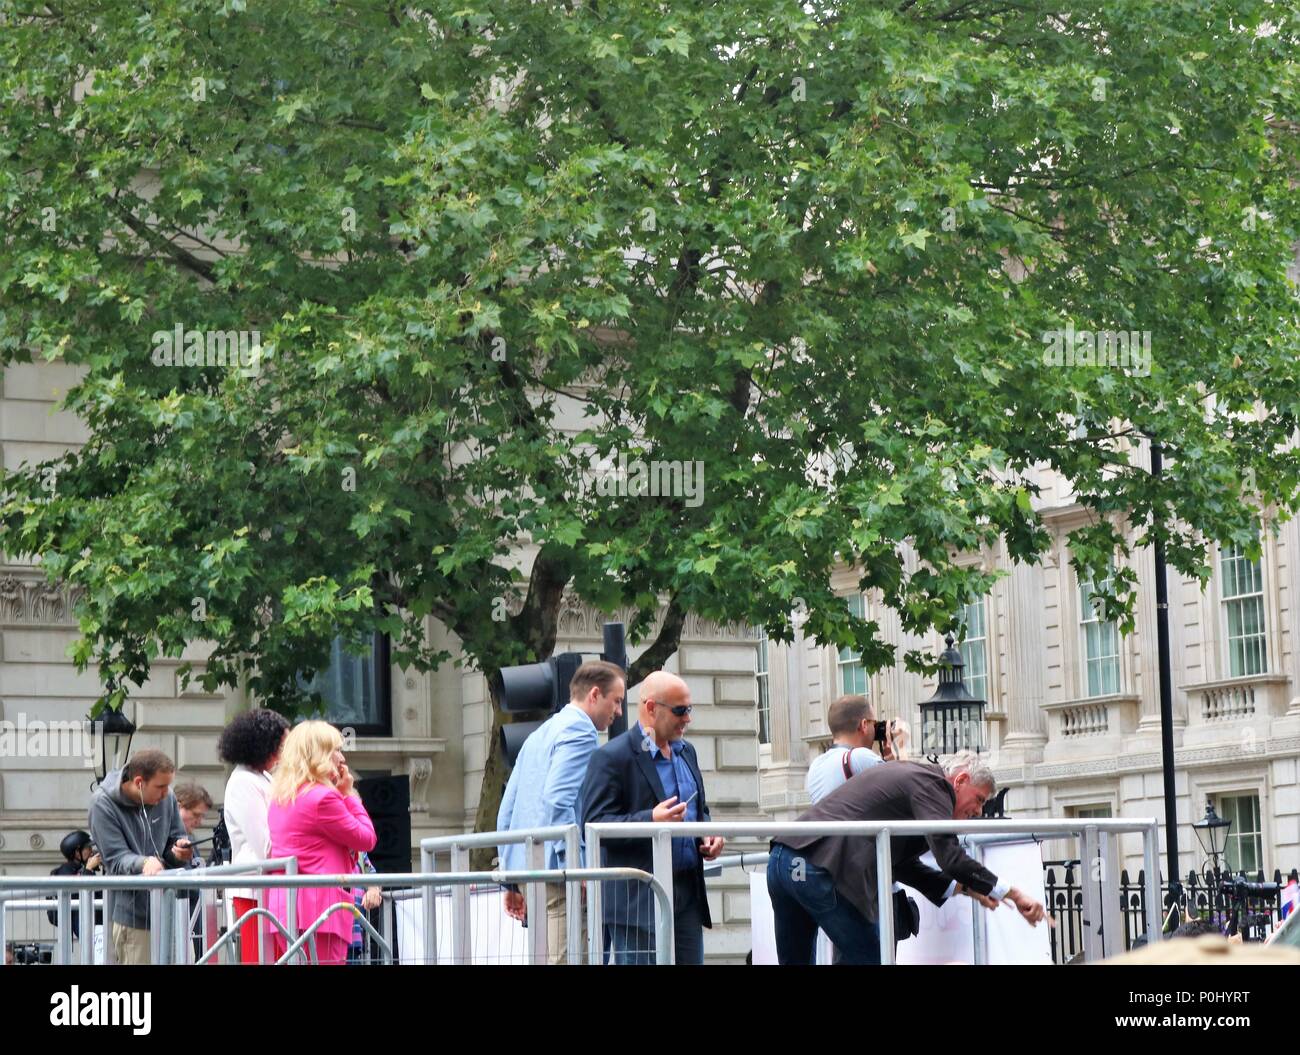 London, UK. 9th June 2018. Free Tommy Robinson March in London, UK with thousands of people marching and waving flags and plaques, police also in attendance at this event with riot wear. Credit: Michelle Bridges/Alamy Live News Stock Photo